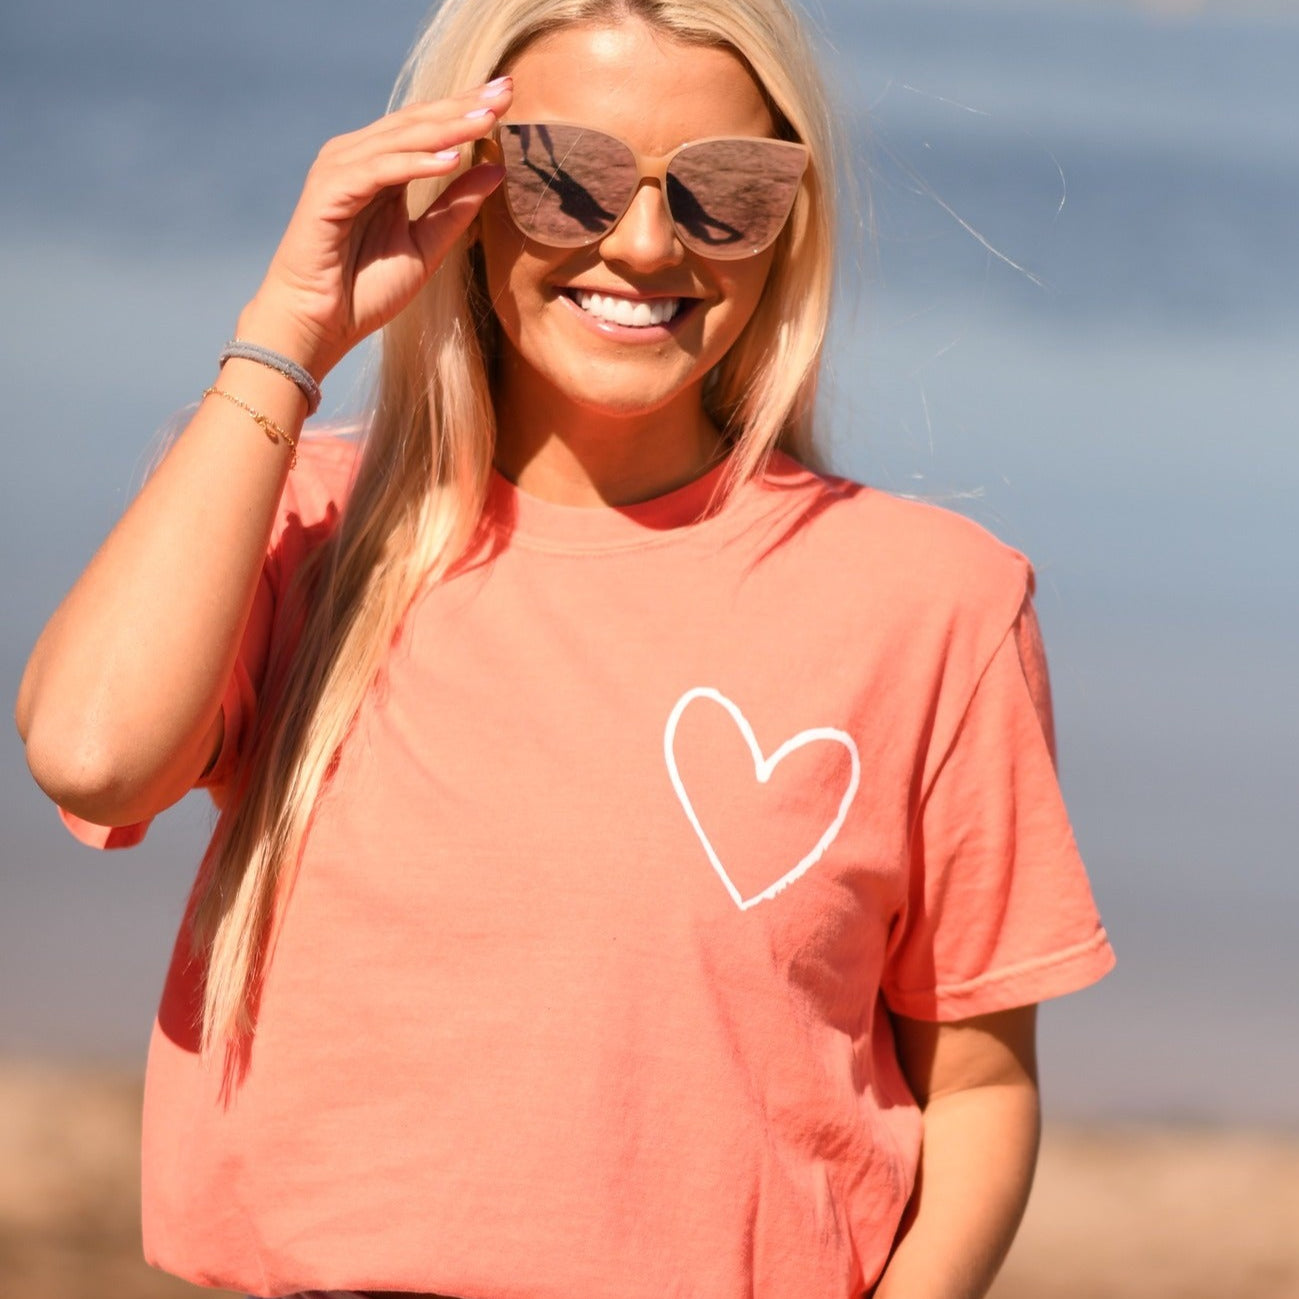 Dear Person Behind Me Tee - Comfort Colors - Bright Salmon-Apparel-LouisGeorge Boutique-LouisGeorge Boutique, Women’s Fashion Boutique Located in Trussville, Alabama